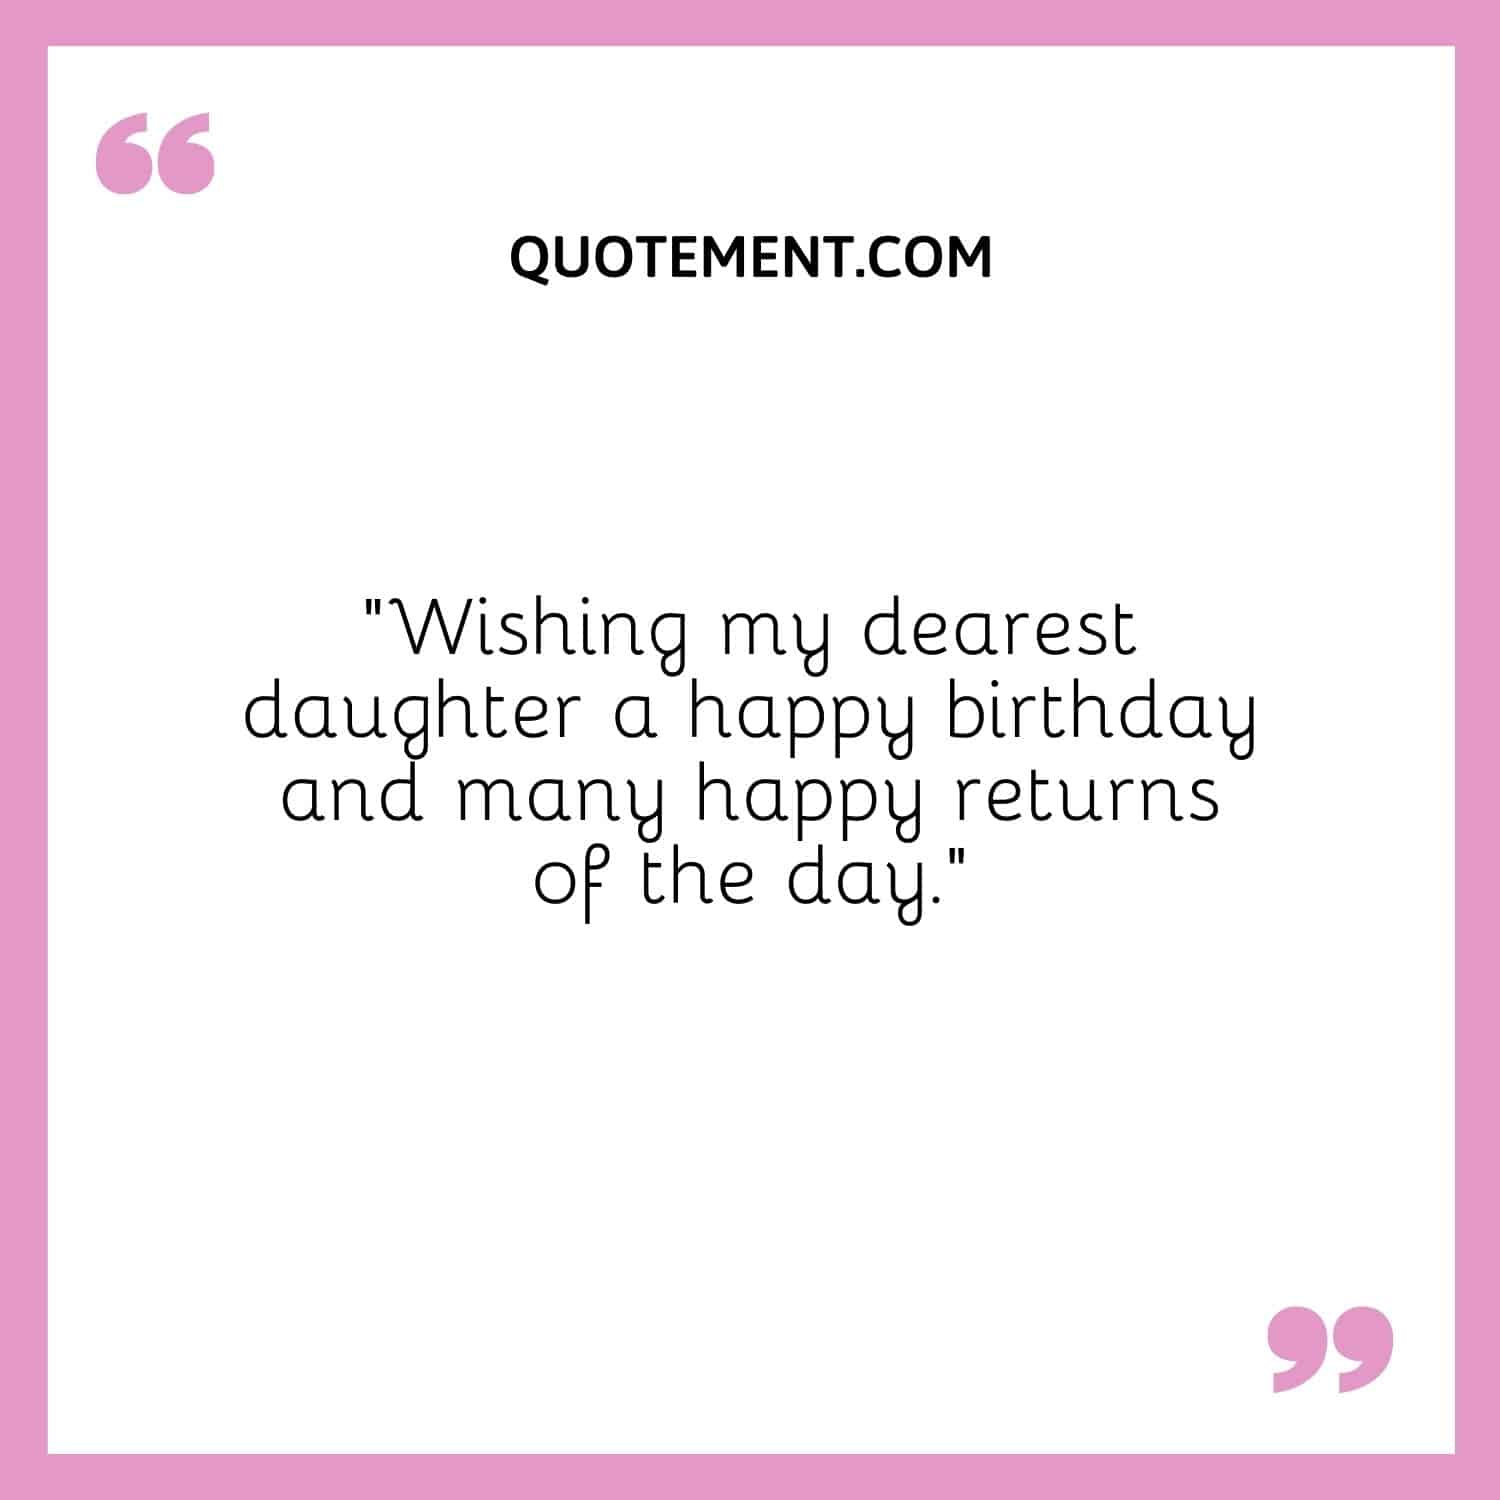 Wishing my dearest daughter a happy birthday and many happy returns of the day.